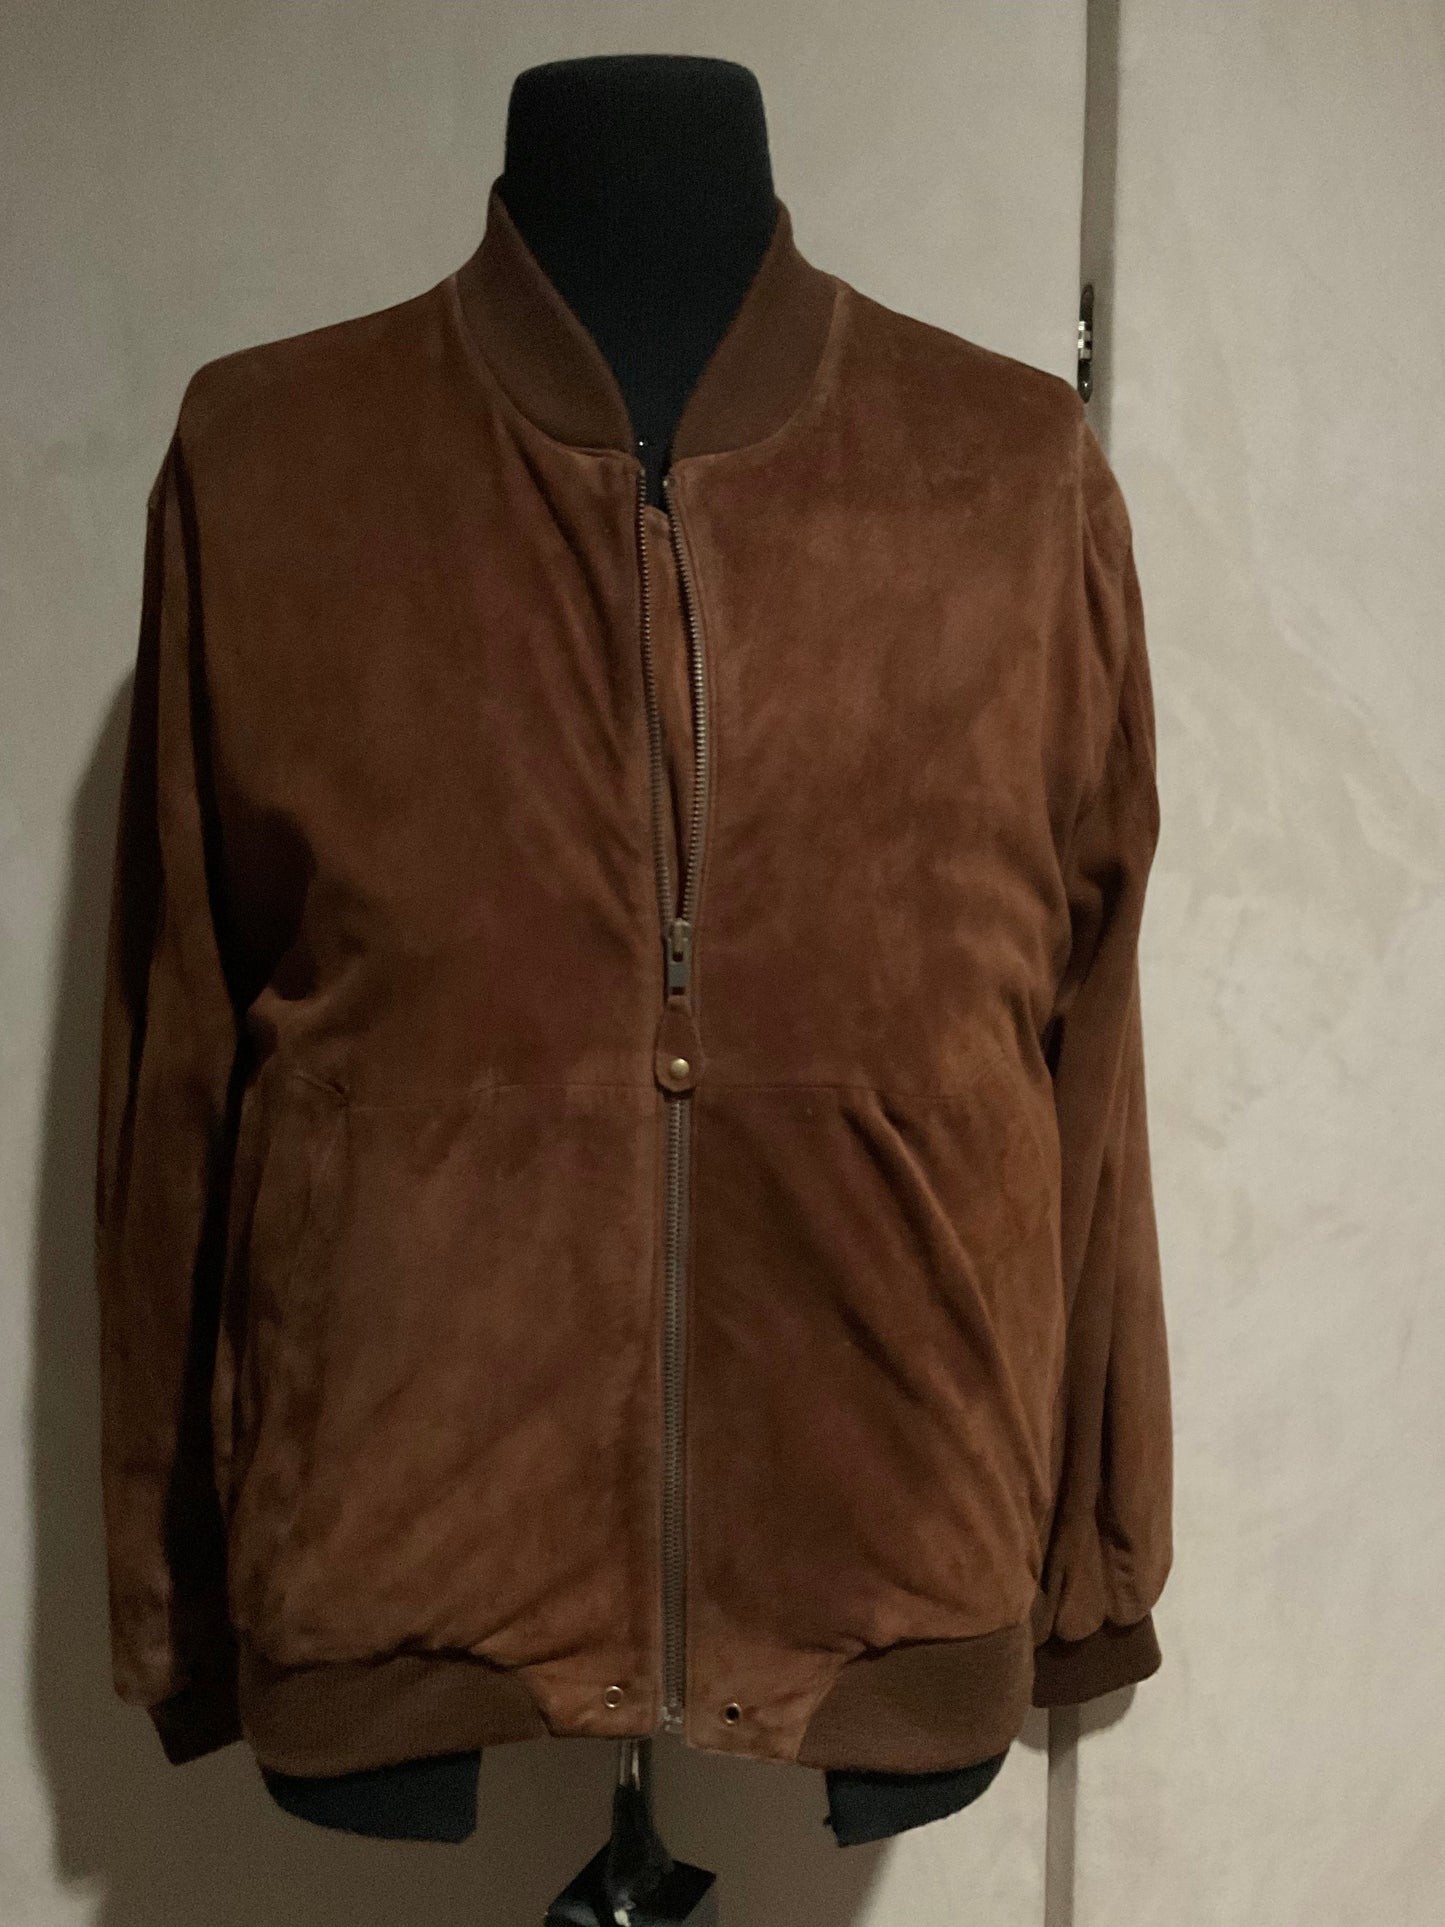 R P SUEDE JACKET / MEDIUM / BROWN RUST / NEW / CRAFTED IN USA